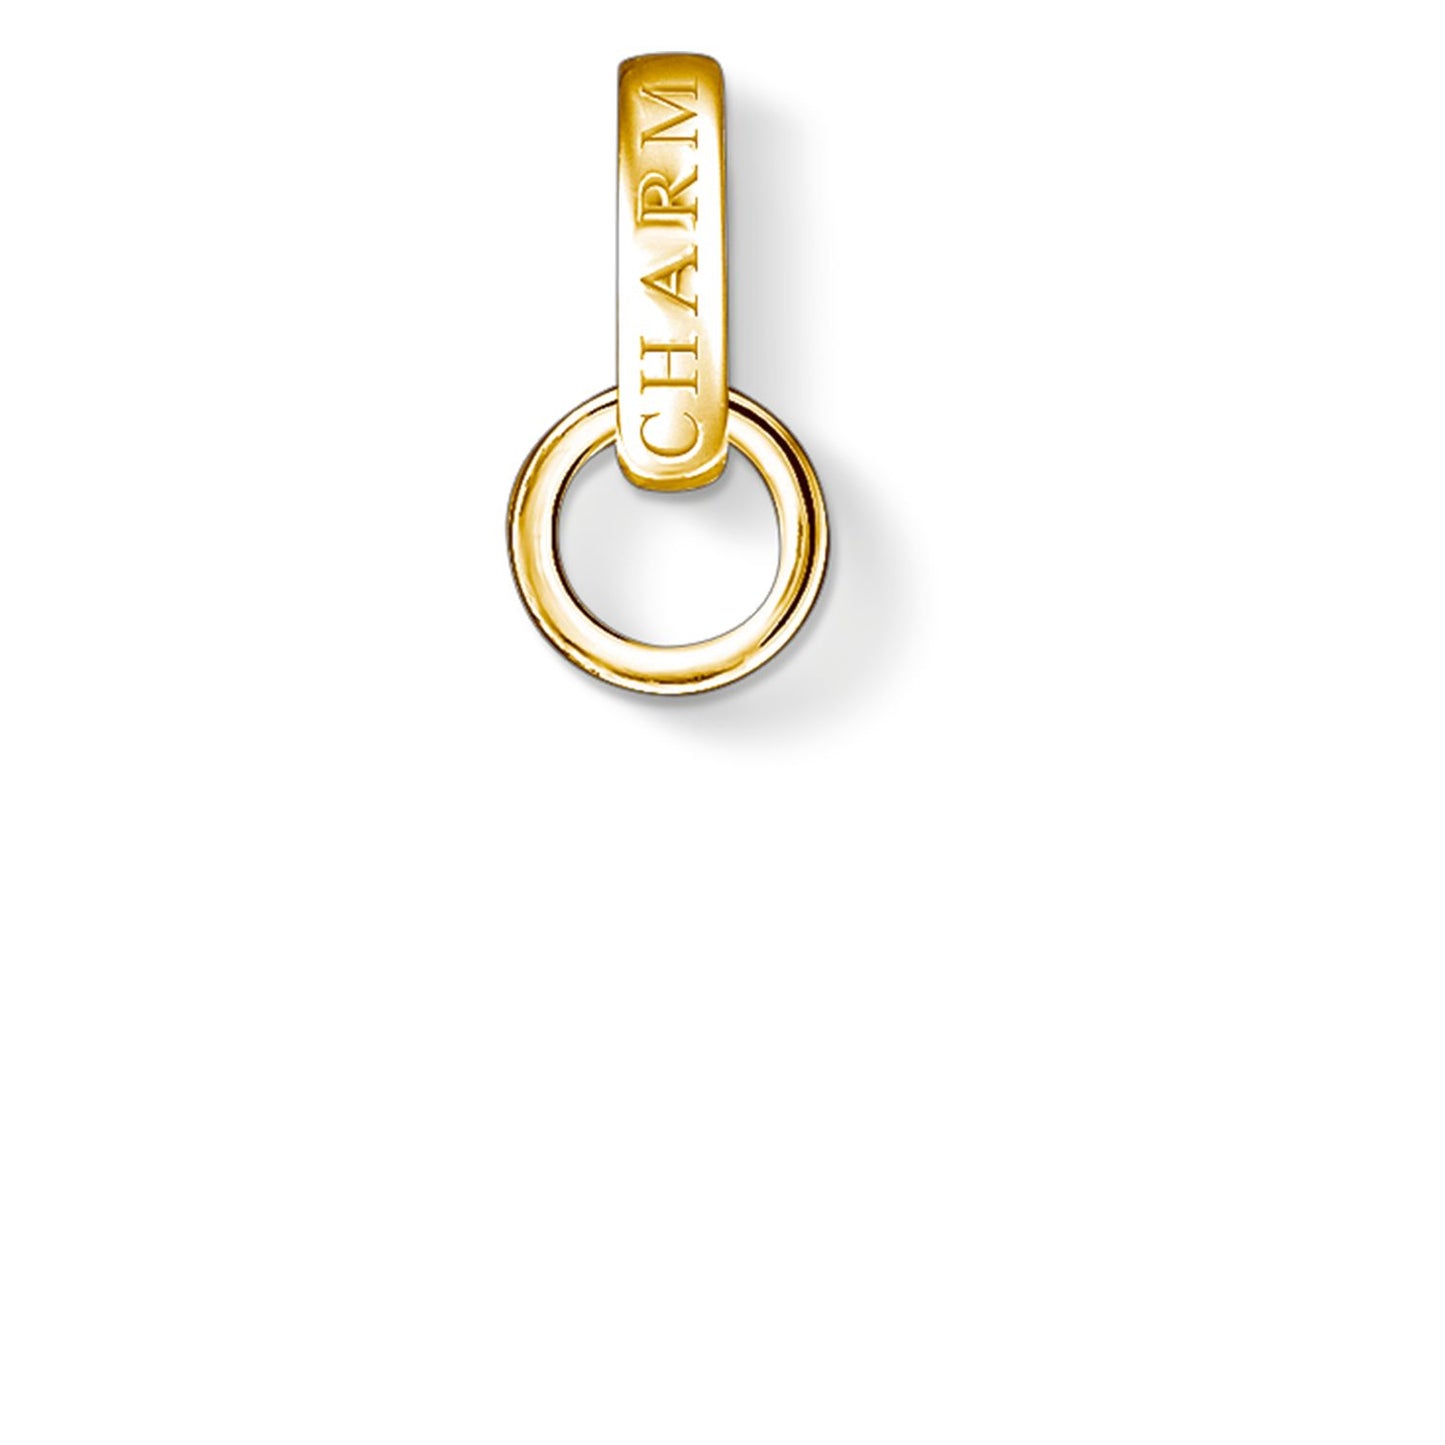 CHARM CLUB STERLING SILVER YELLOW GOLD PLATED CHARM CARRIER